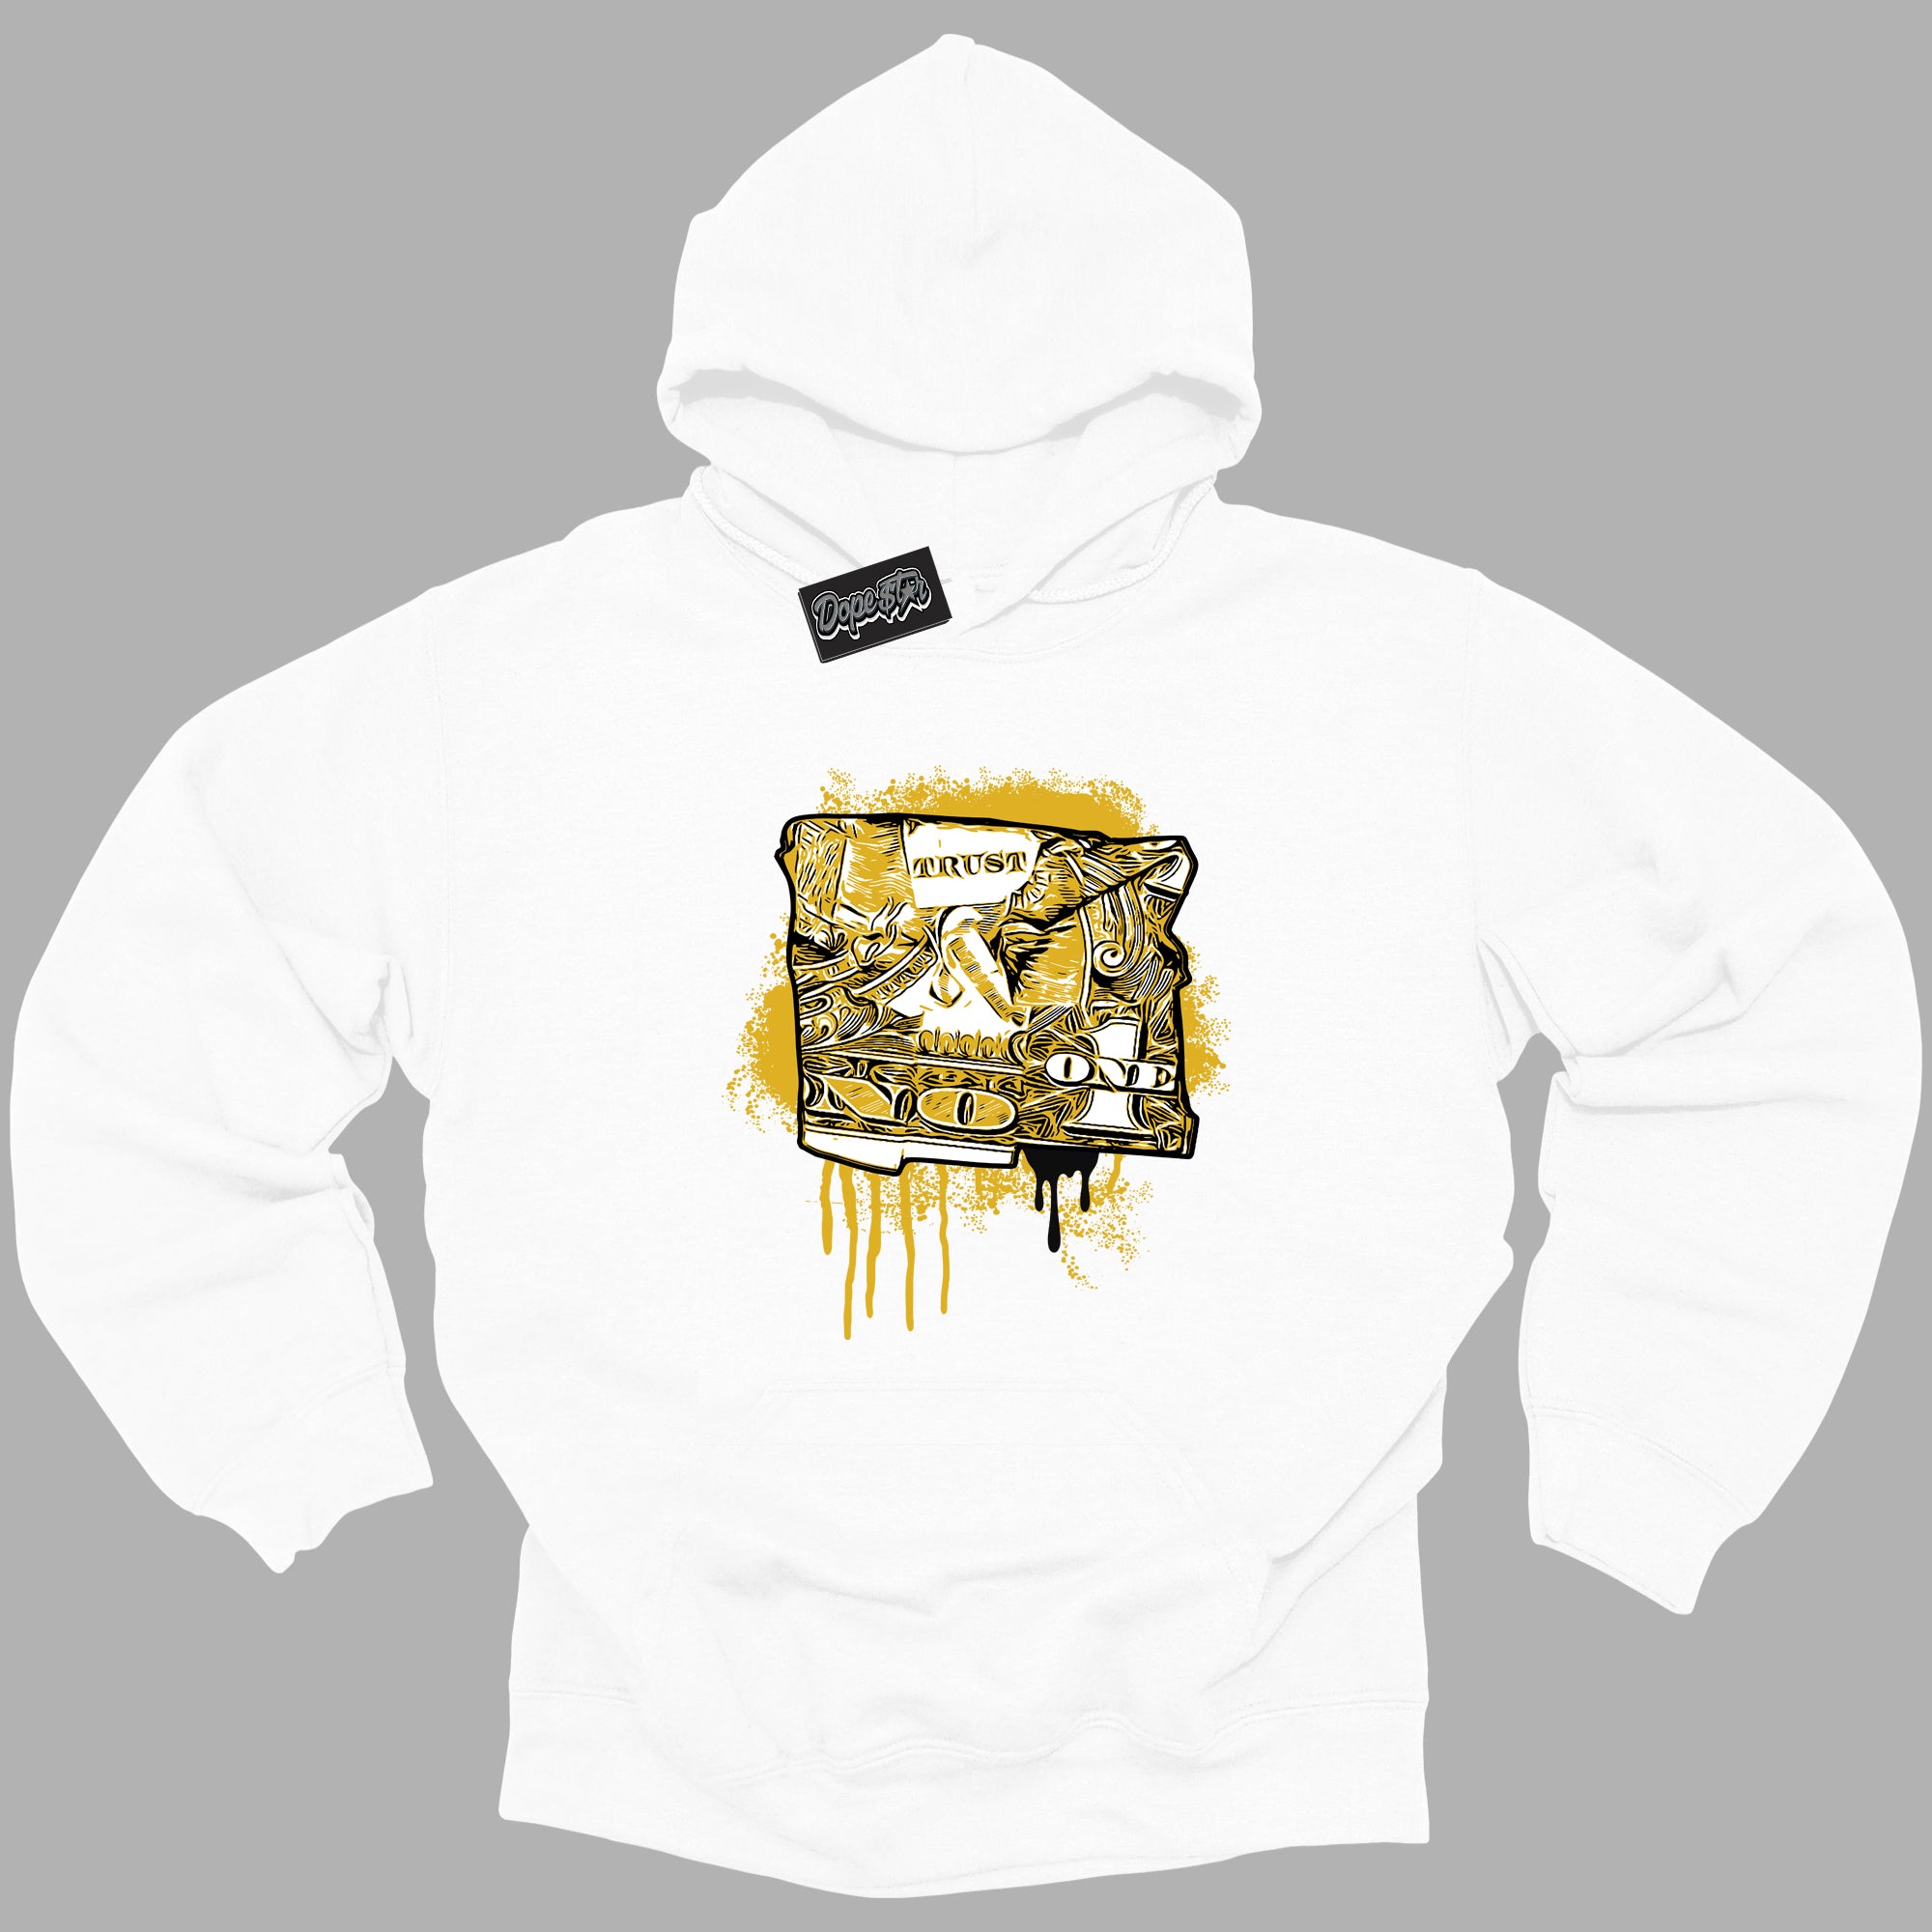 Cool White Hoodie with “Trust No One Dollar ”  design that Perfectly Matches Yellow Ochre 6s Sneakers.